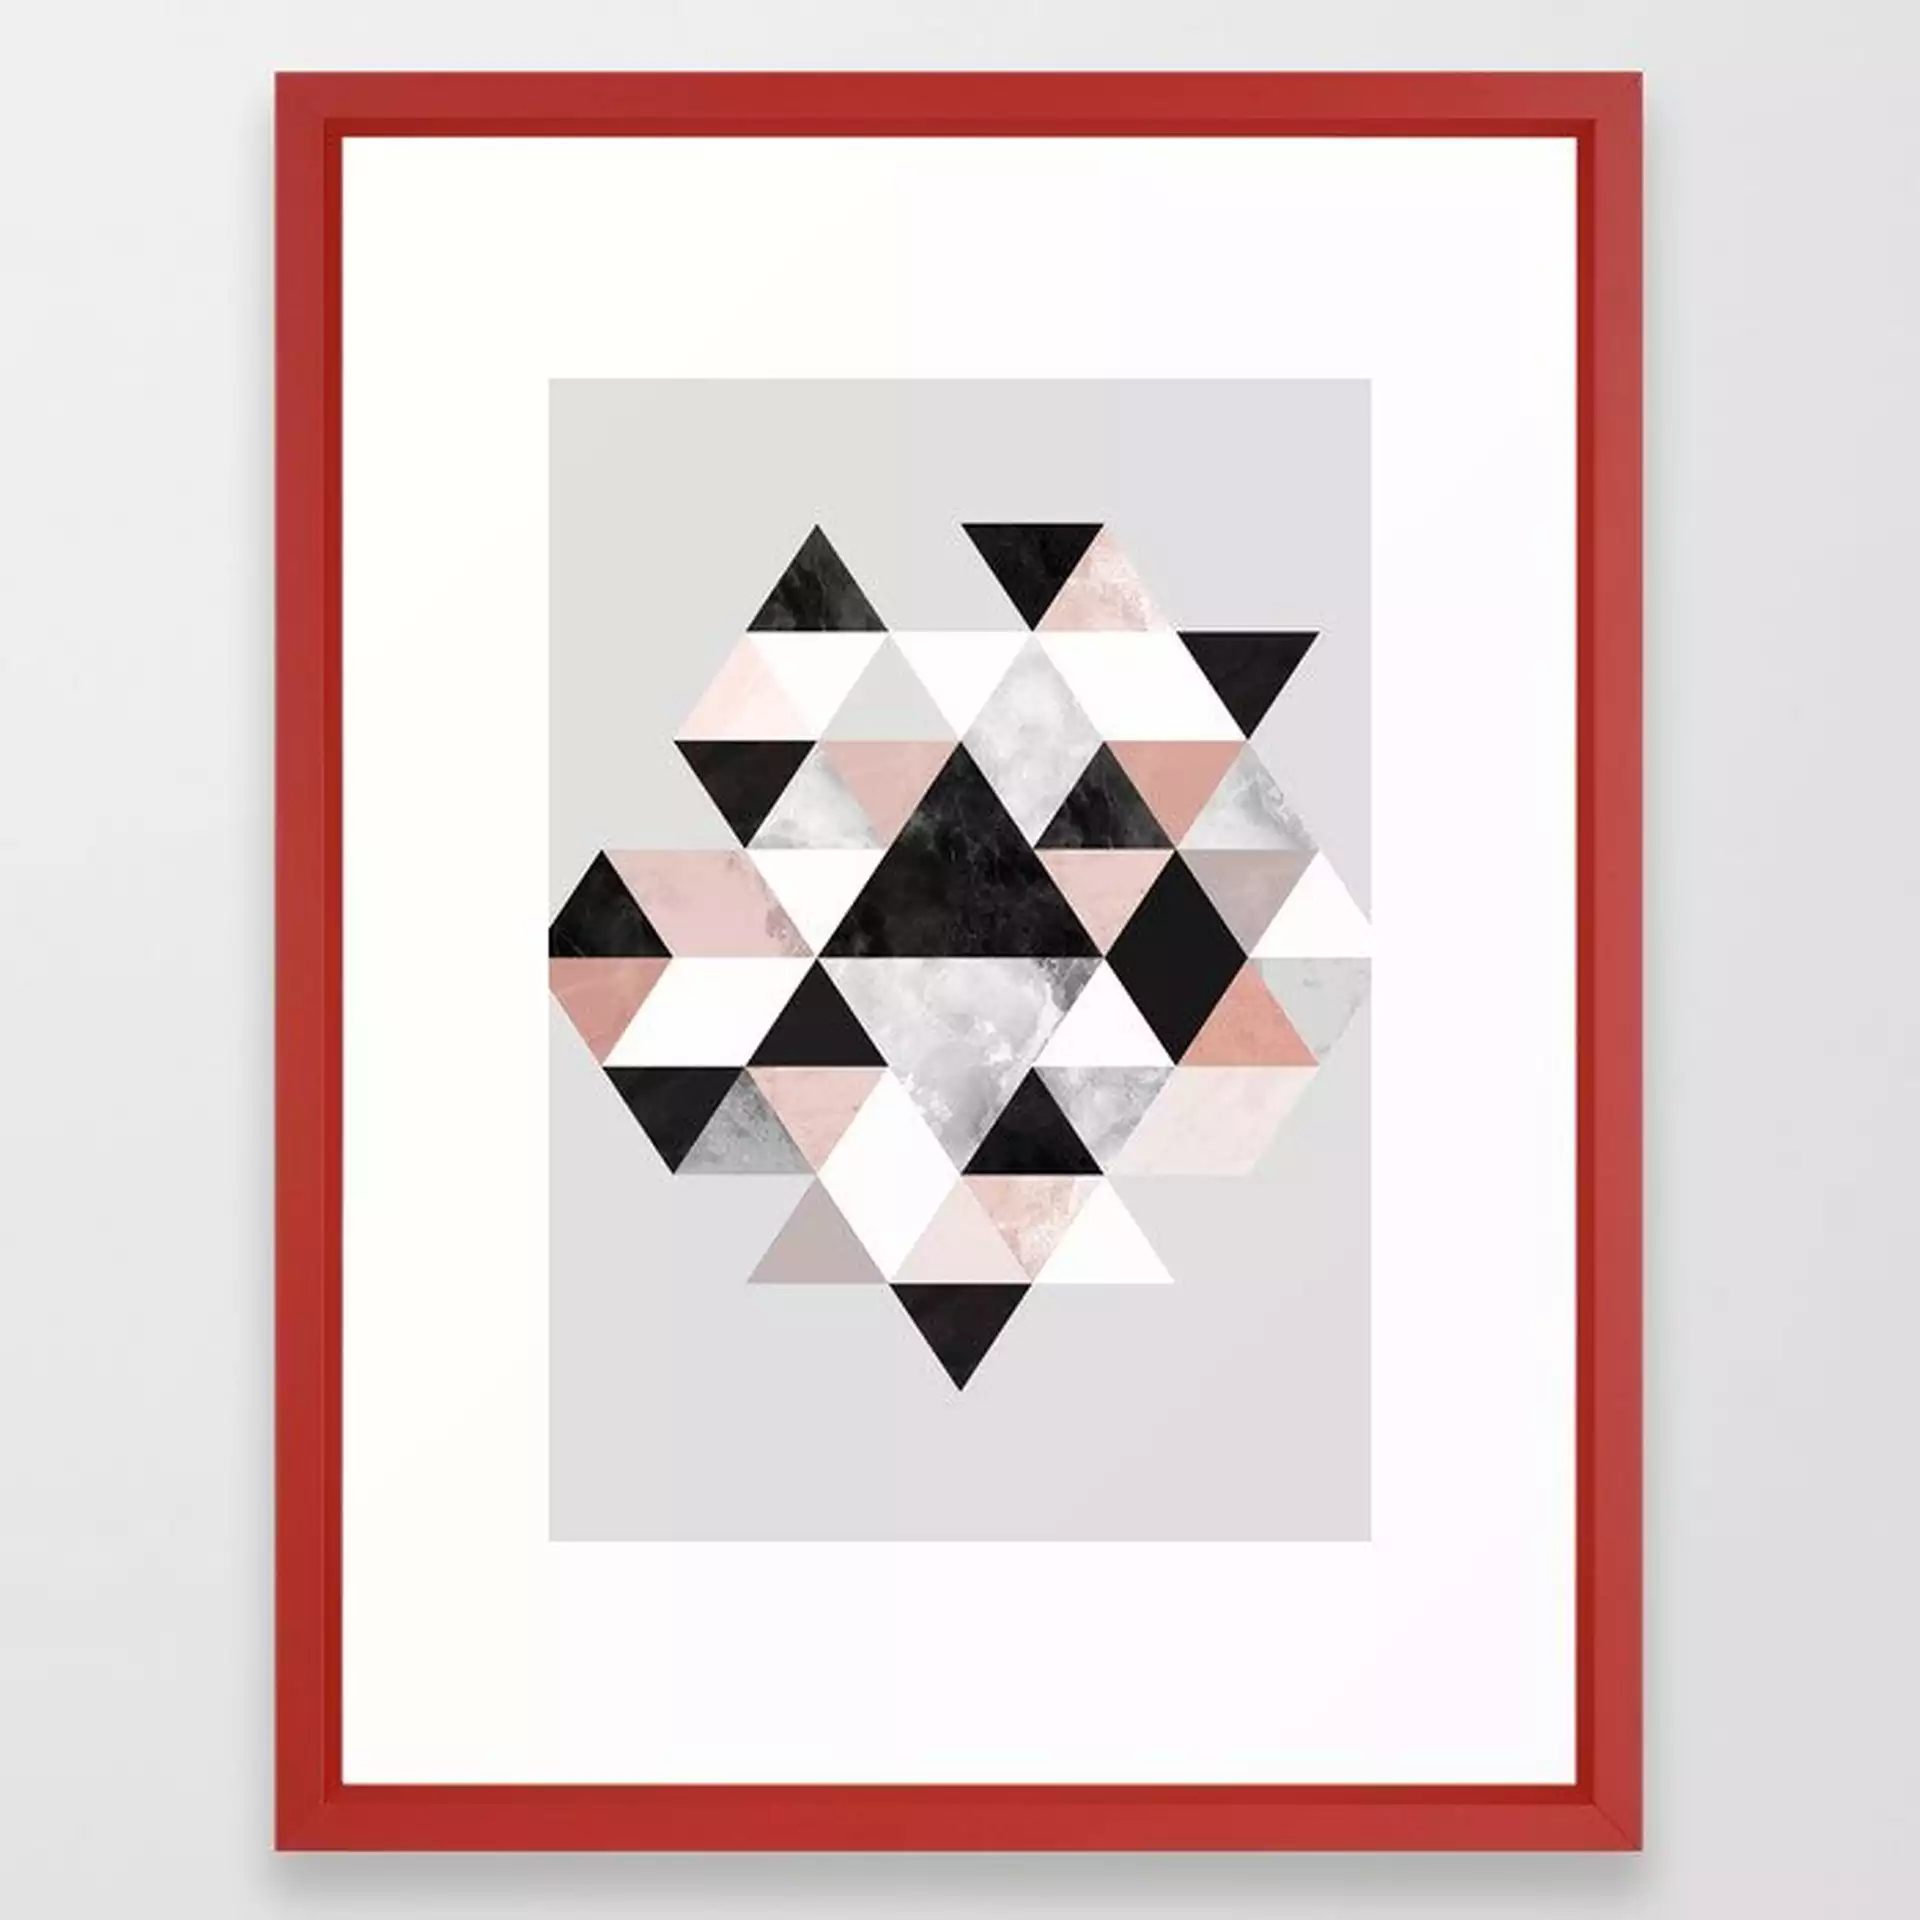 Graphic 202 Framed Art Print by Mareike BaPhmer - Vector Red - MEDIUM (Gallery)-20x26